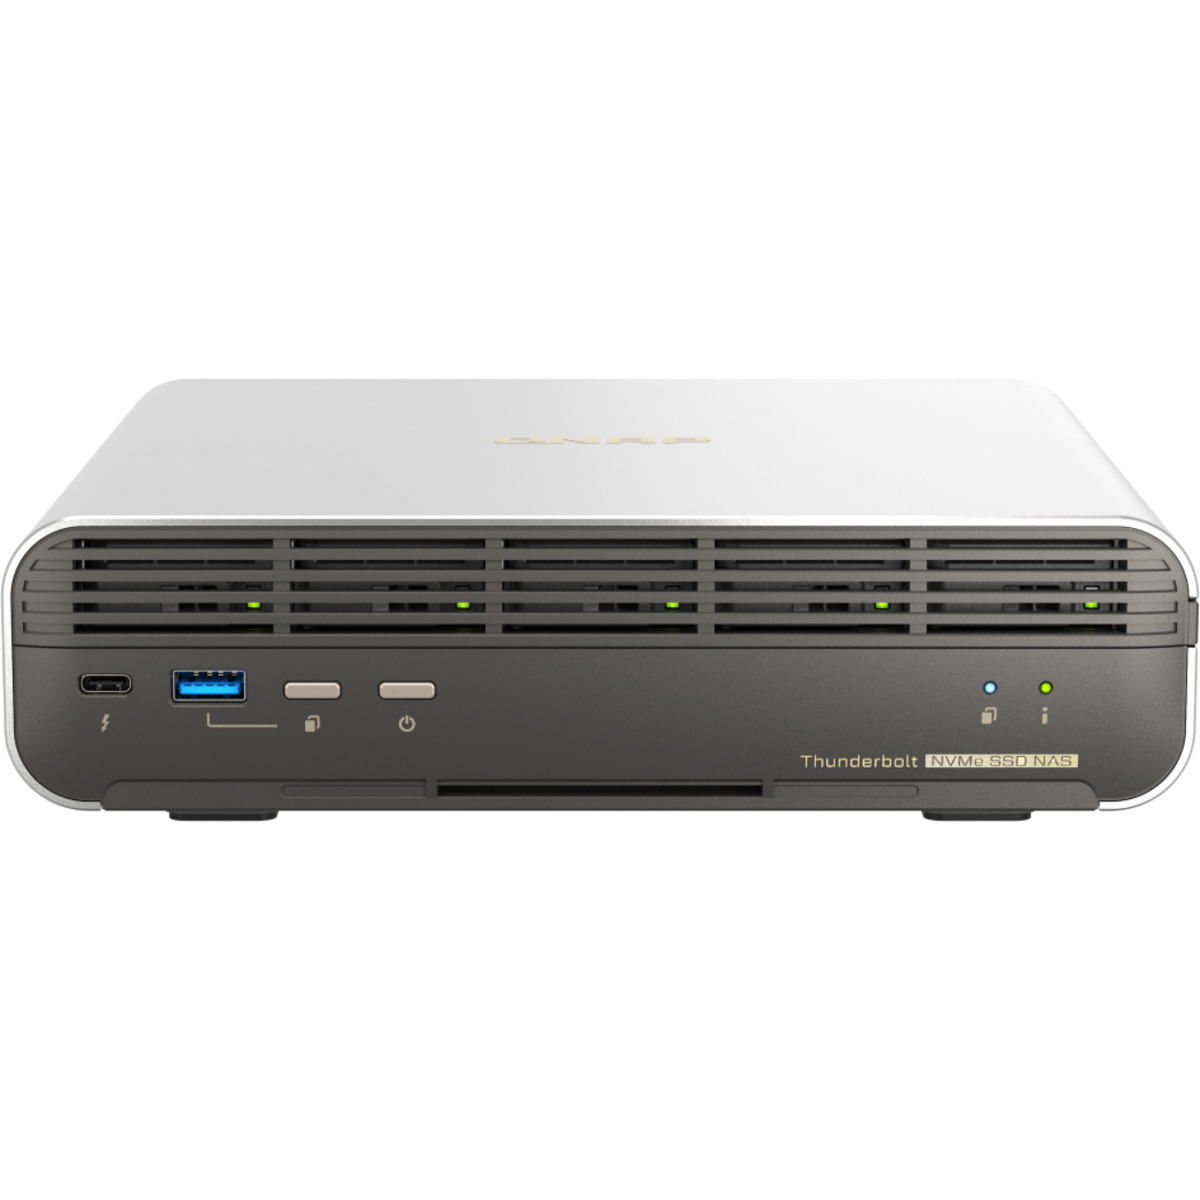 QNAP TBS-h574TX Core i5 Thunderbolt 4 8tb 5-Bay Desktop Multimedia / Power User / Business DAS-NAS - Combo Direct + Network Storage Device 4x2tb Sabrent Rocket 5 SB-RKT5-2TB  14000/12000MB/s M.2 2280 NVMe SSD CONSUMER Class Drives Installed - Burn-In Tested TBS-h574TX Core i5 Thunderbolt 4